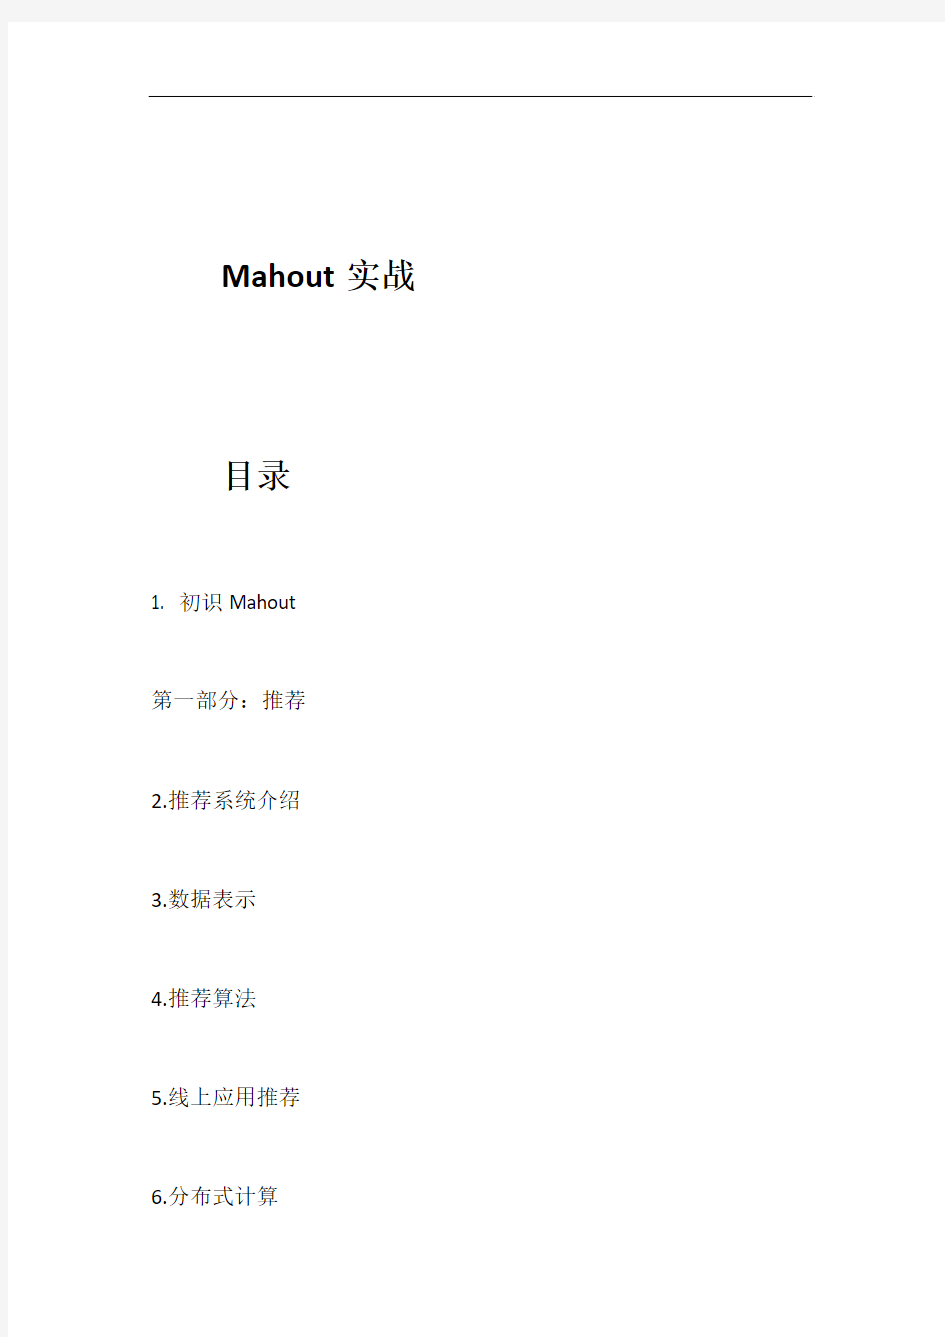 Mahout in action 中文版